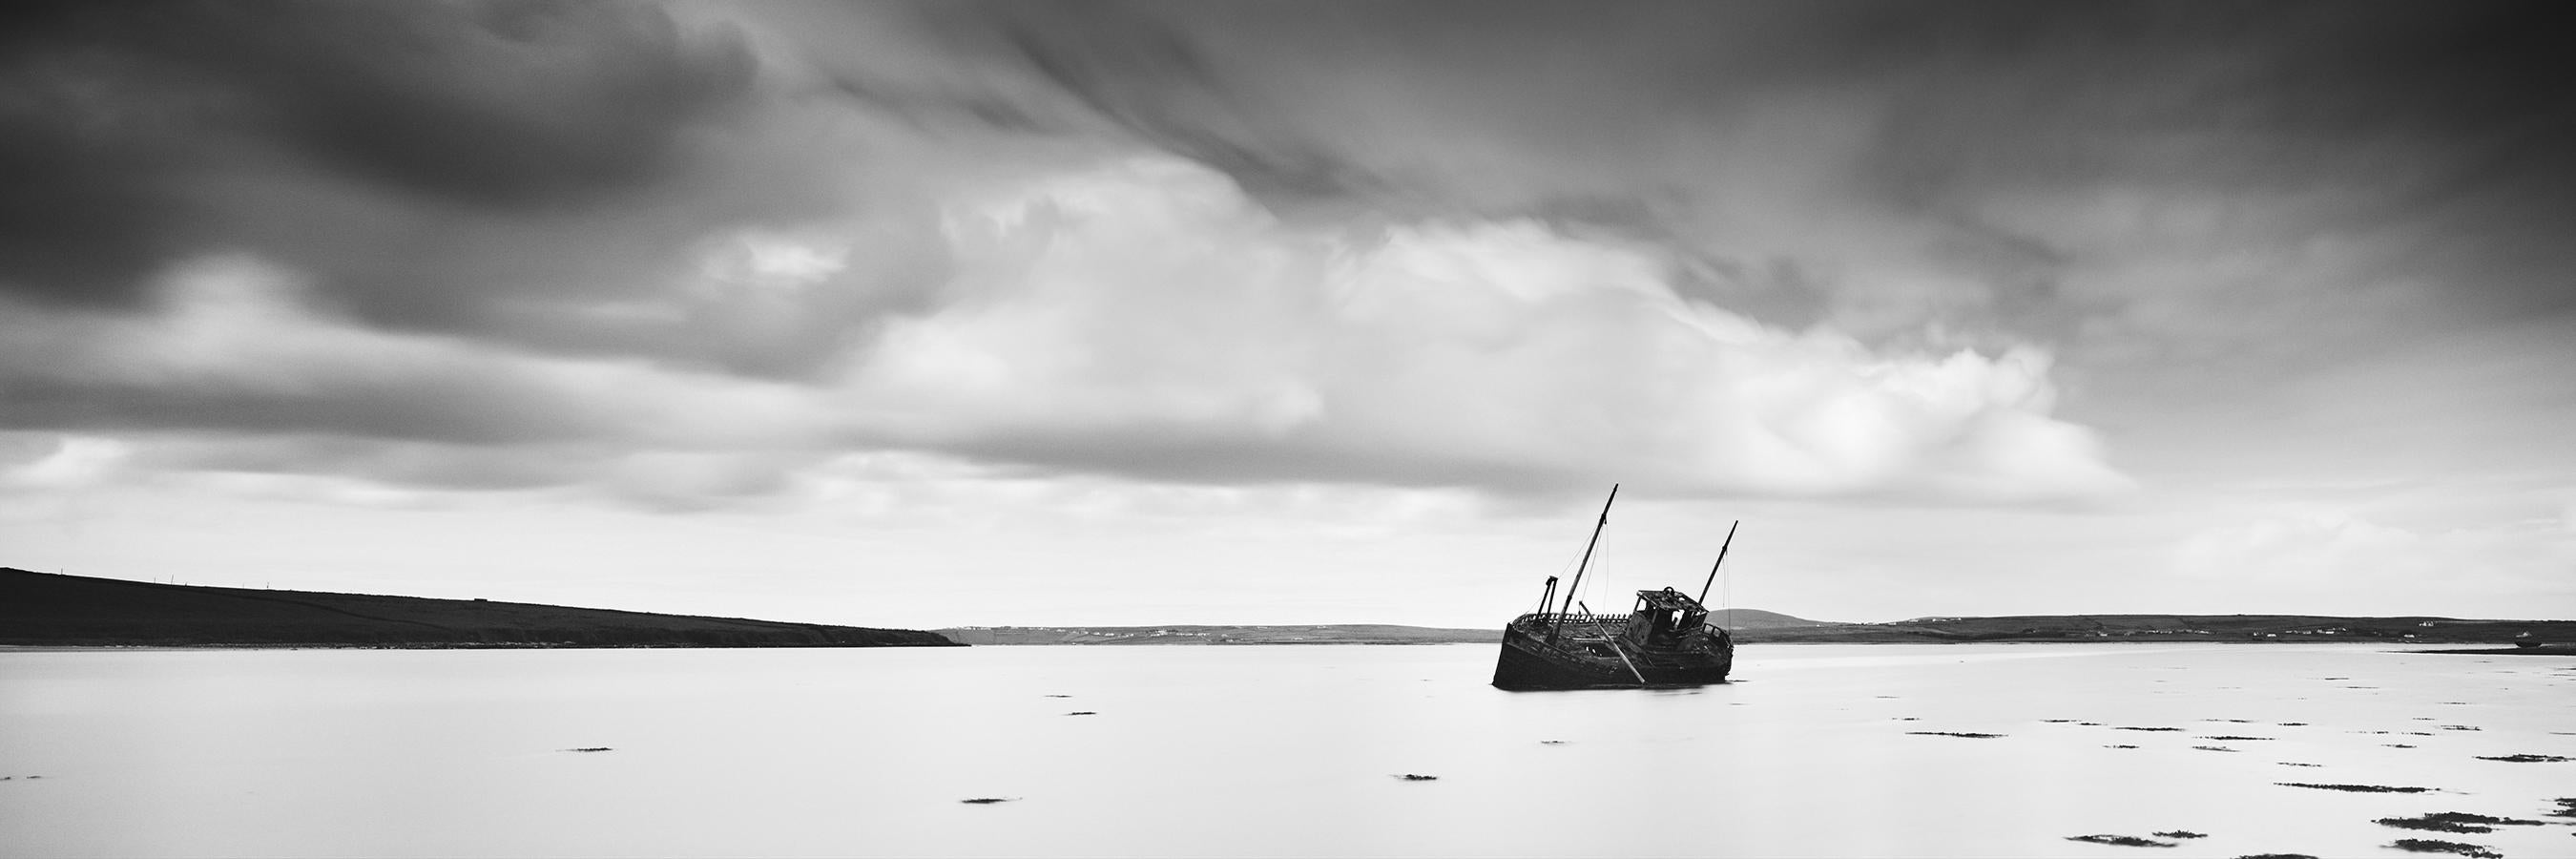 Gerald Berghammer Black and White Photograph - Stranded Panorama Ireland contemporary black and white art landscape photography